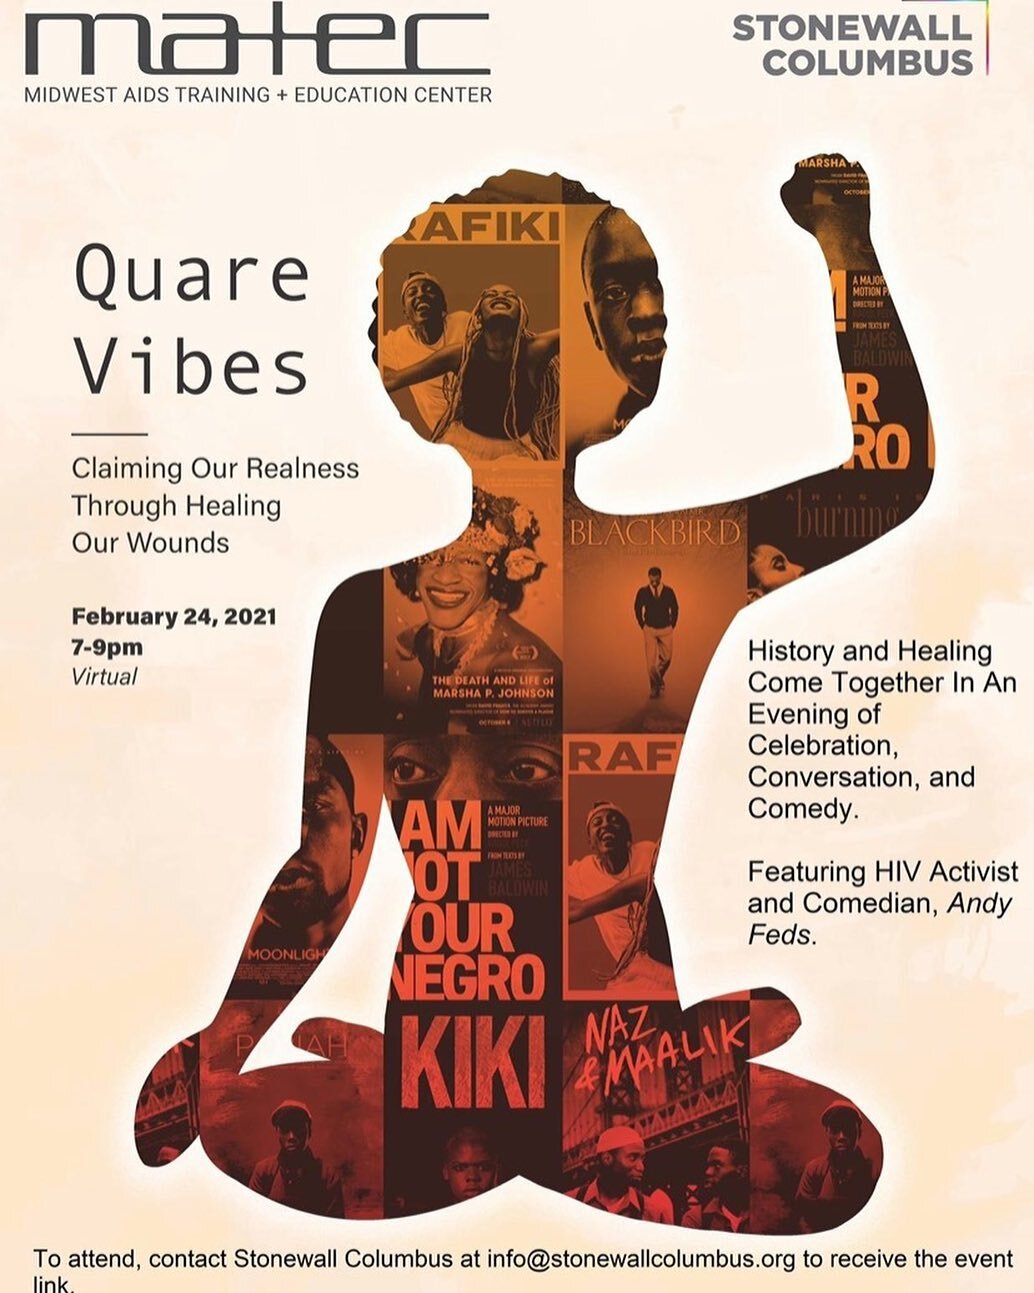 the arts will forever be my first love 🕊 I look forward to sharing my poem &ldquo;Hymn of the Holy Homo&rdquo; as part of the fantastic line up of educators, panelists and fellow Black artists speaking at &ldquo;Quare Vibes: Claiming Our Realness Th